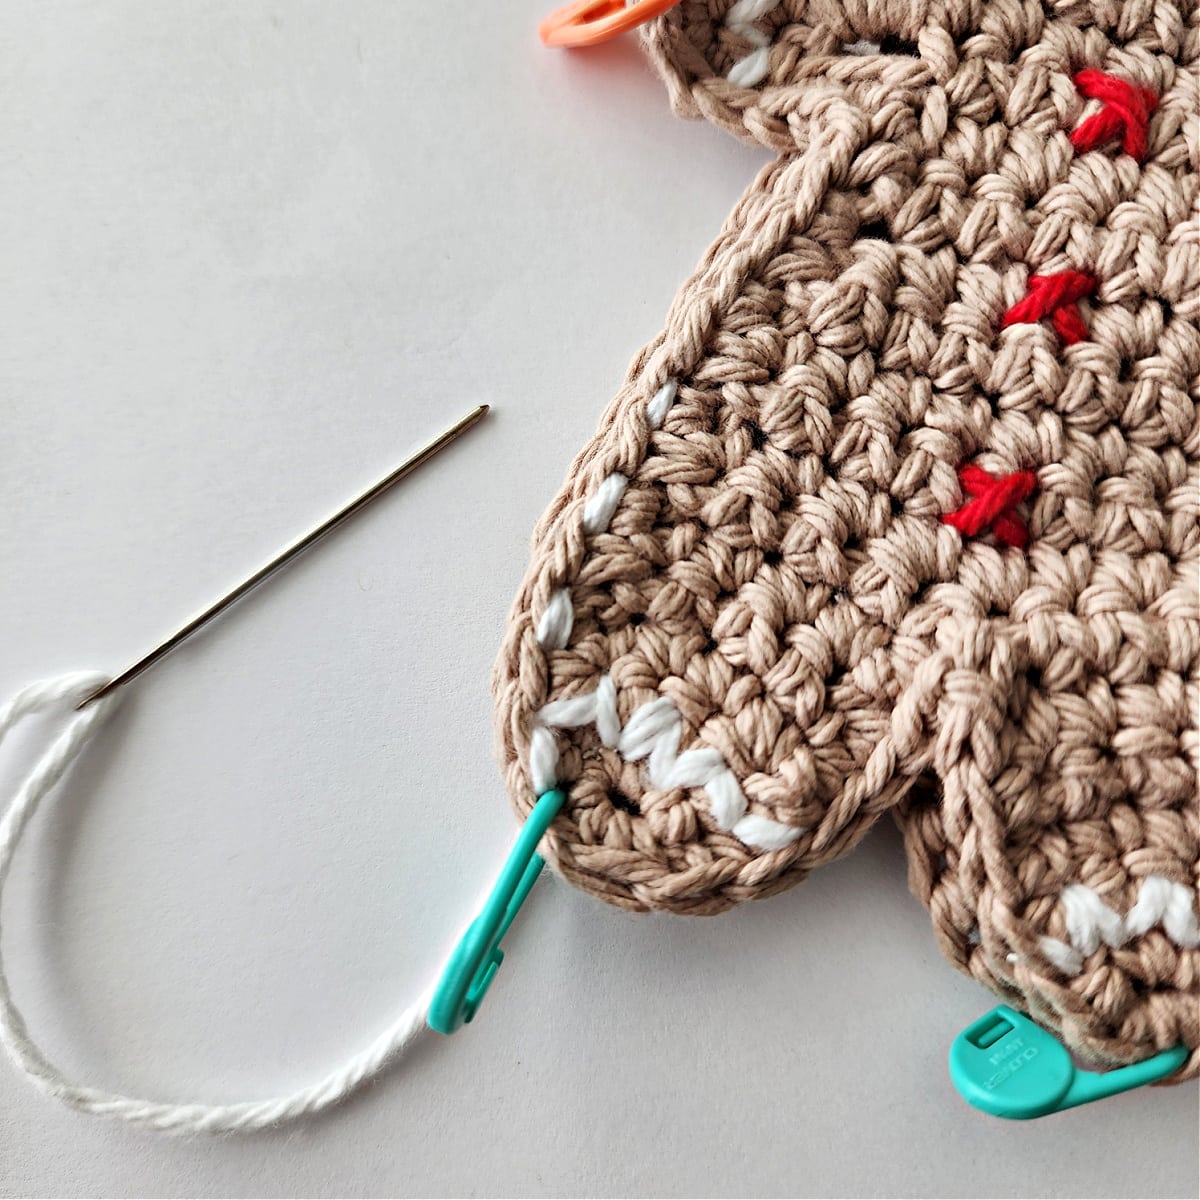 crochet gingerbread man candy cane holder joining tutorial 4